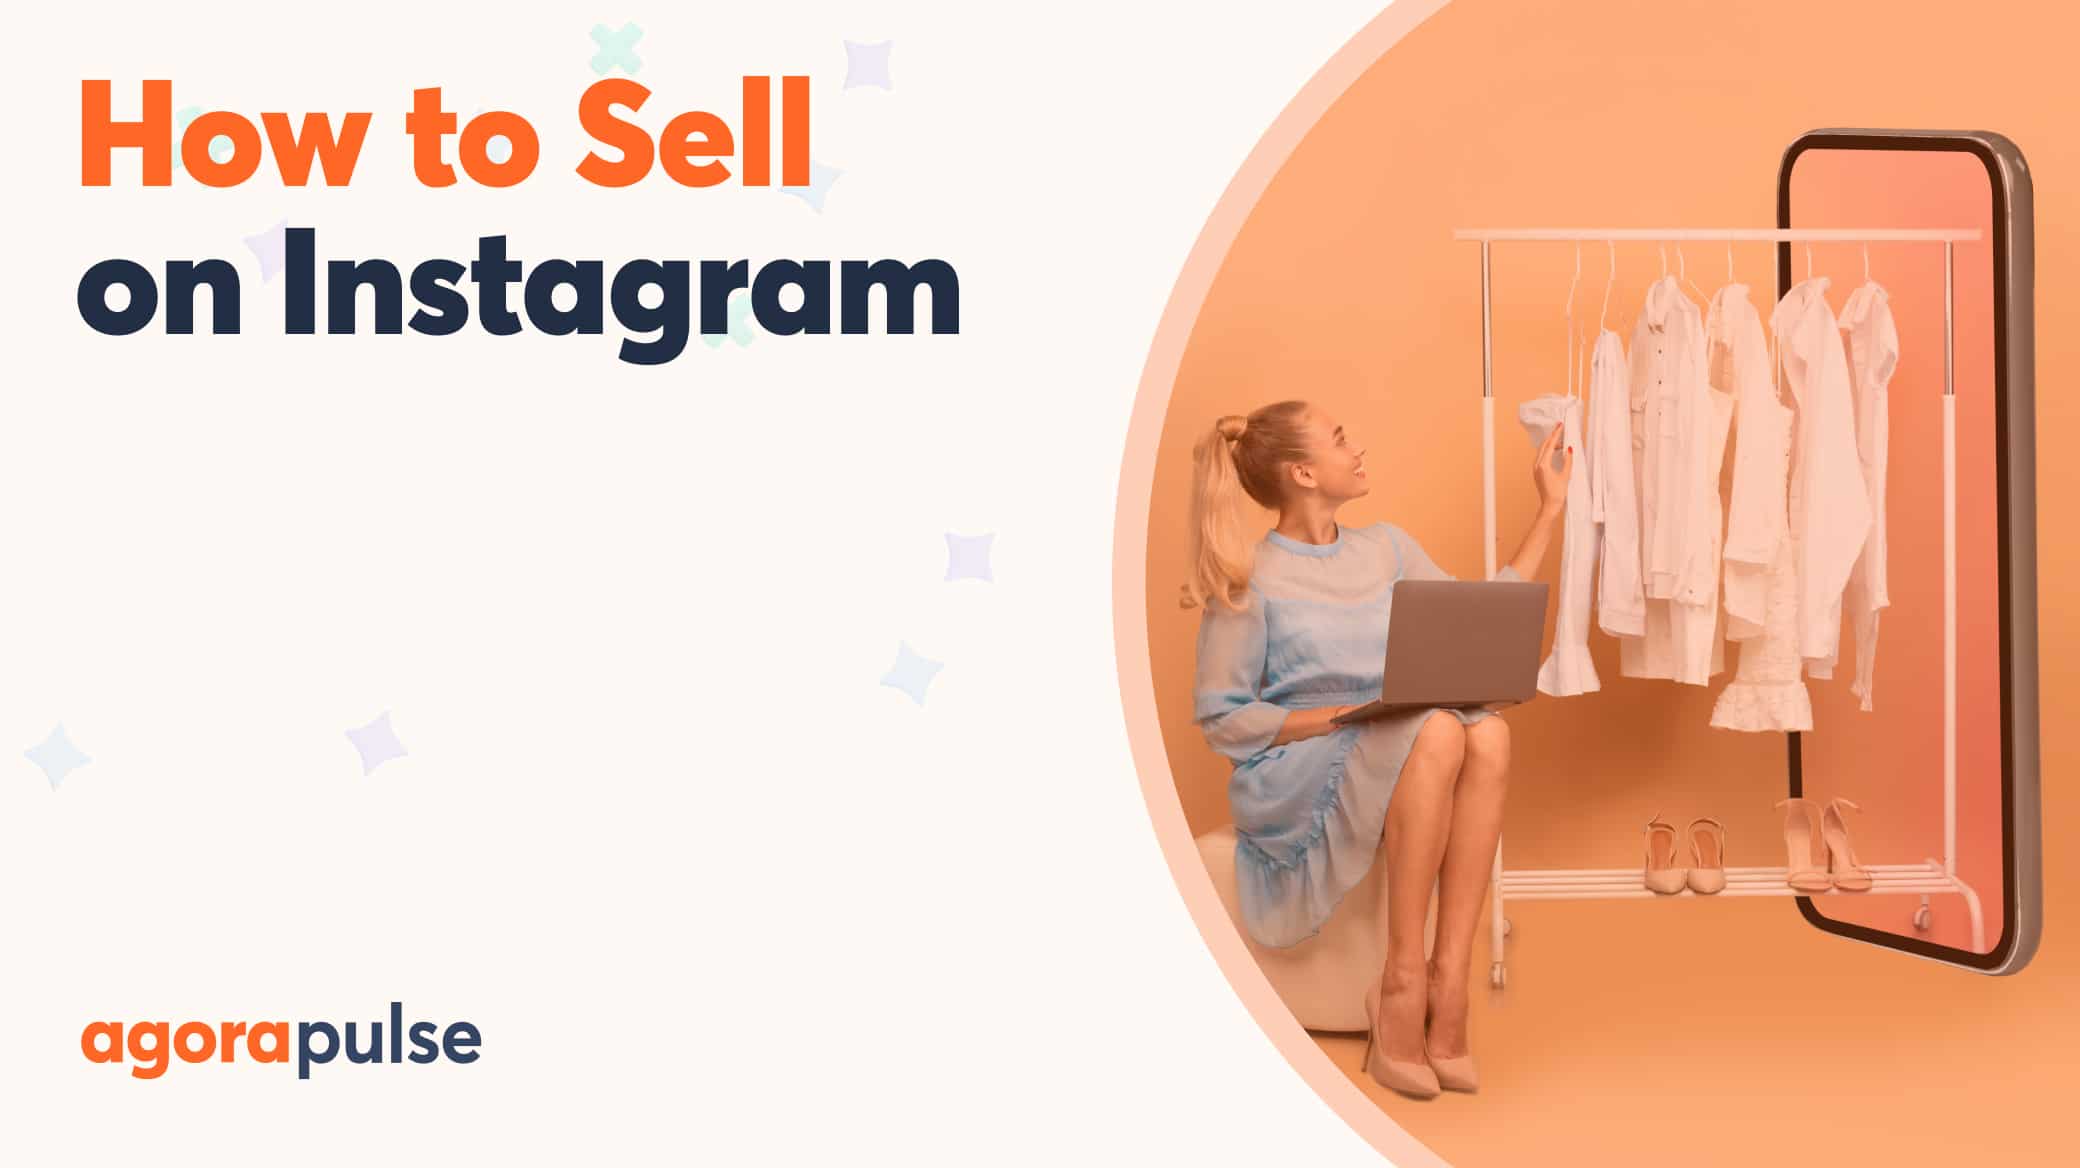 How to Sell on Instagram: A Step-by-Step Guide